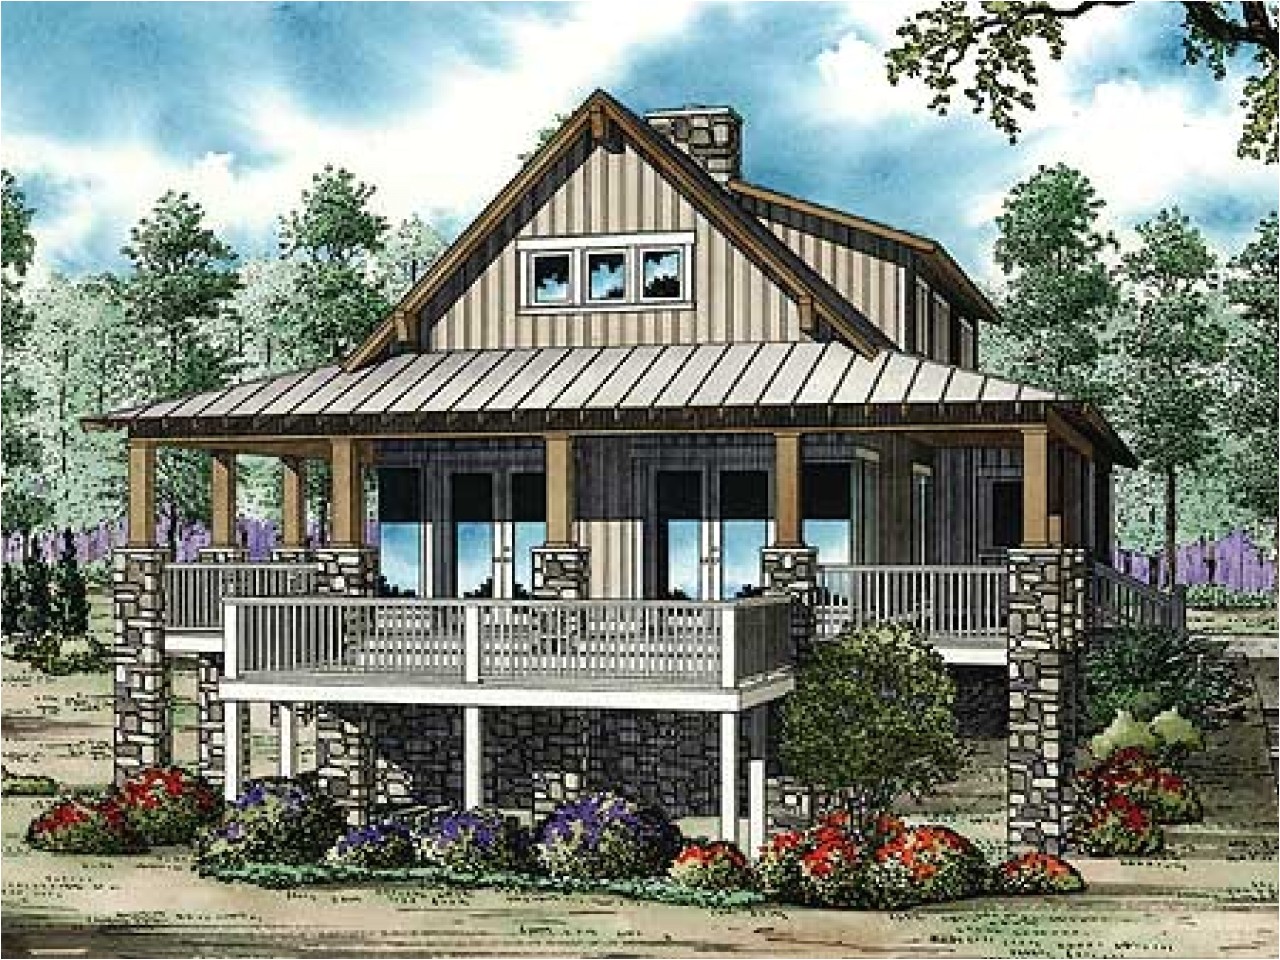 Low Country Style Home Plans Home Ideas Low Country Designs southern Living House Plans